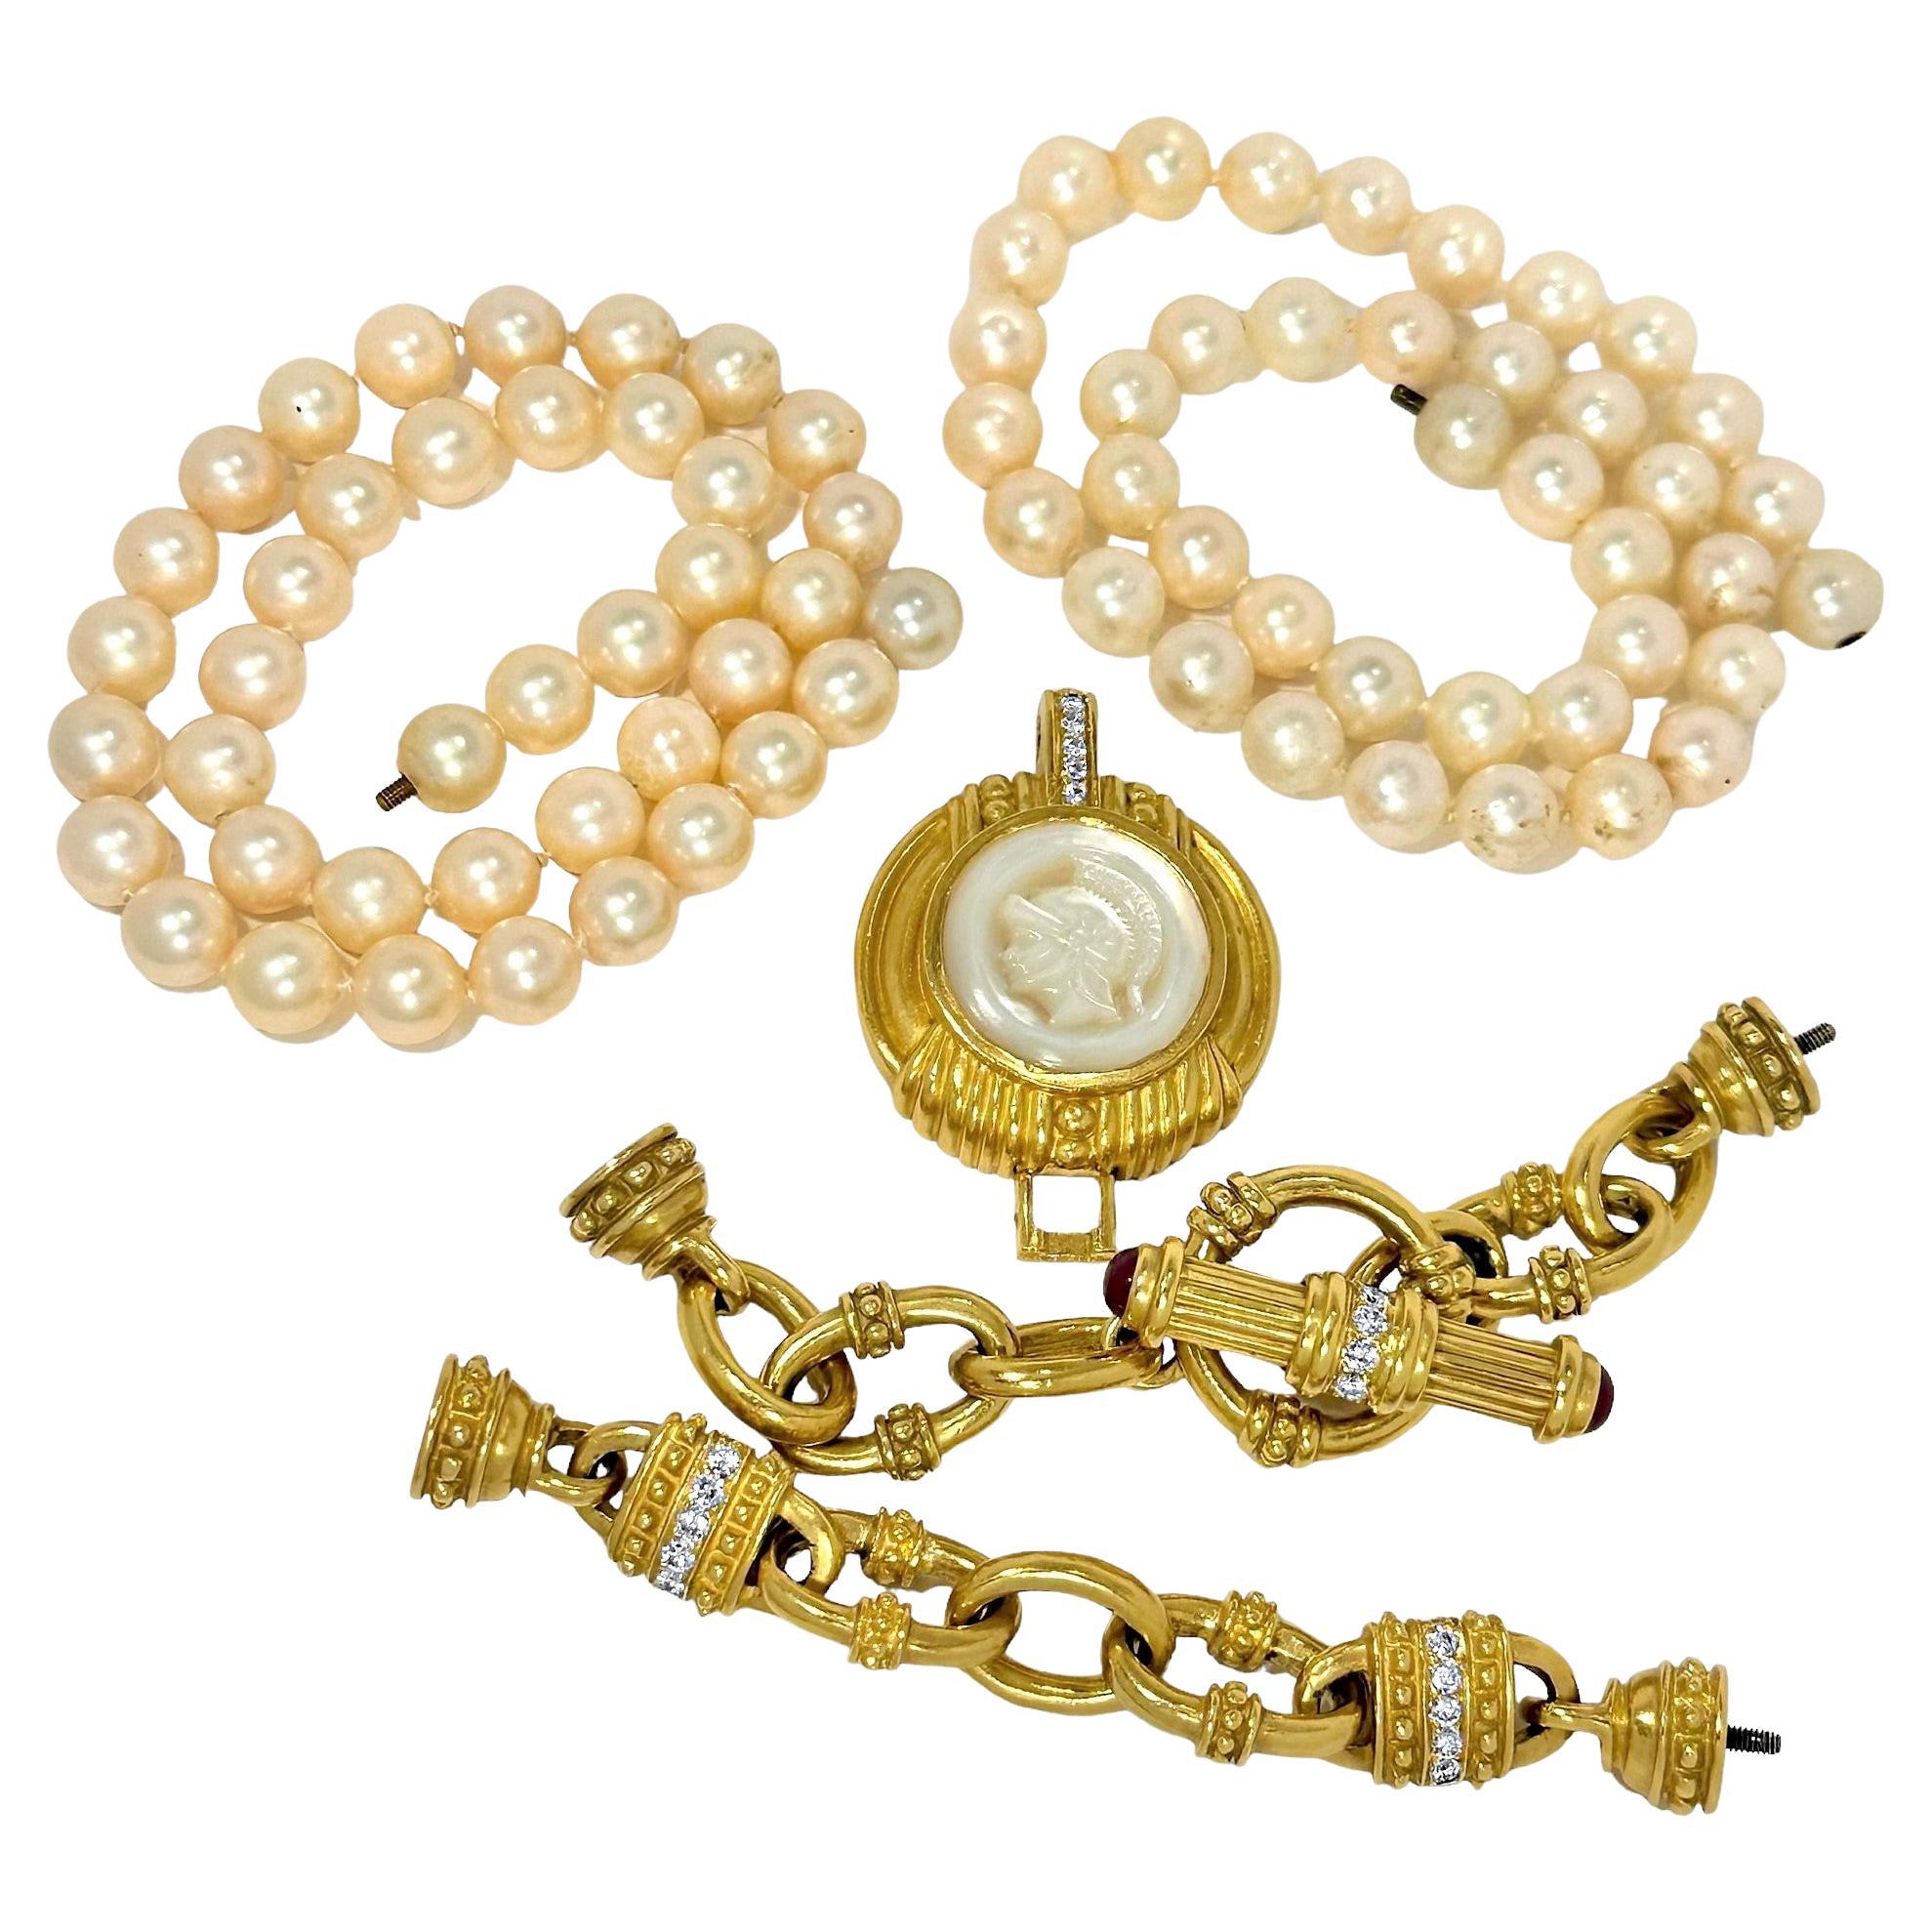 Neoclassical Judith Ripka 18k Gold Classic Revival Pearl Necklace with Special Features For Sale